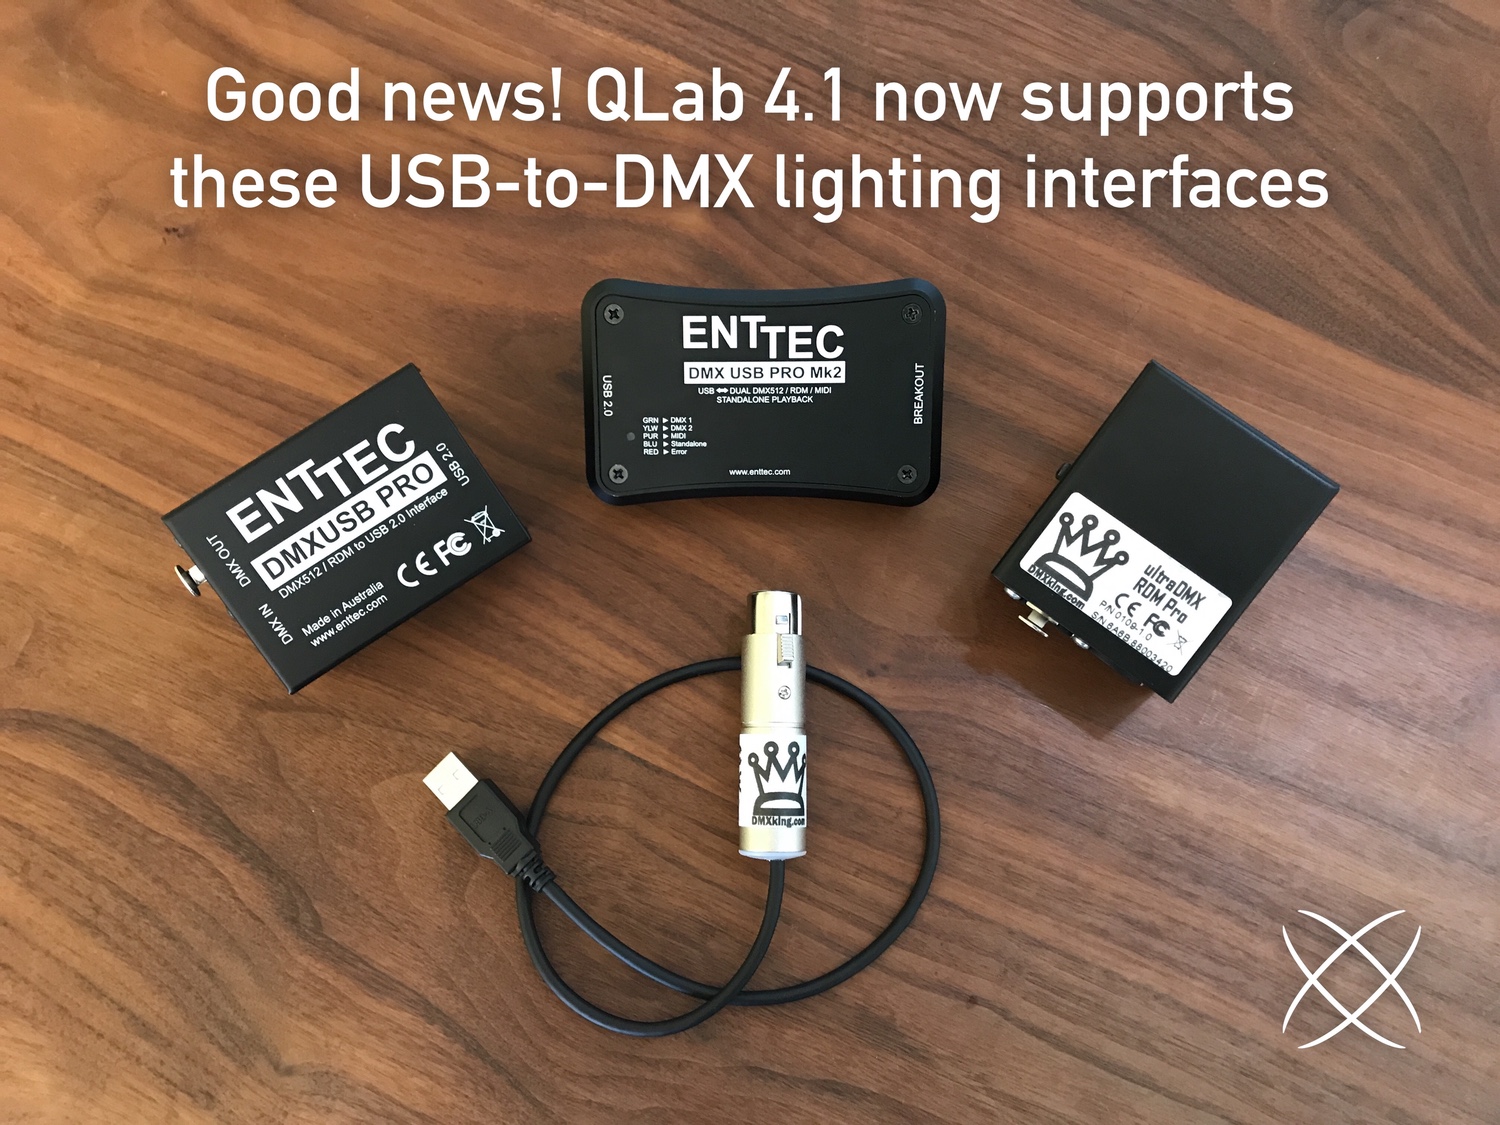 USB to DMX interfaces supported in QLab 4.1